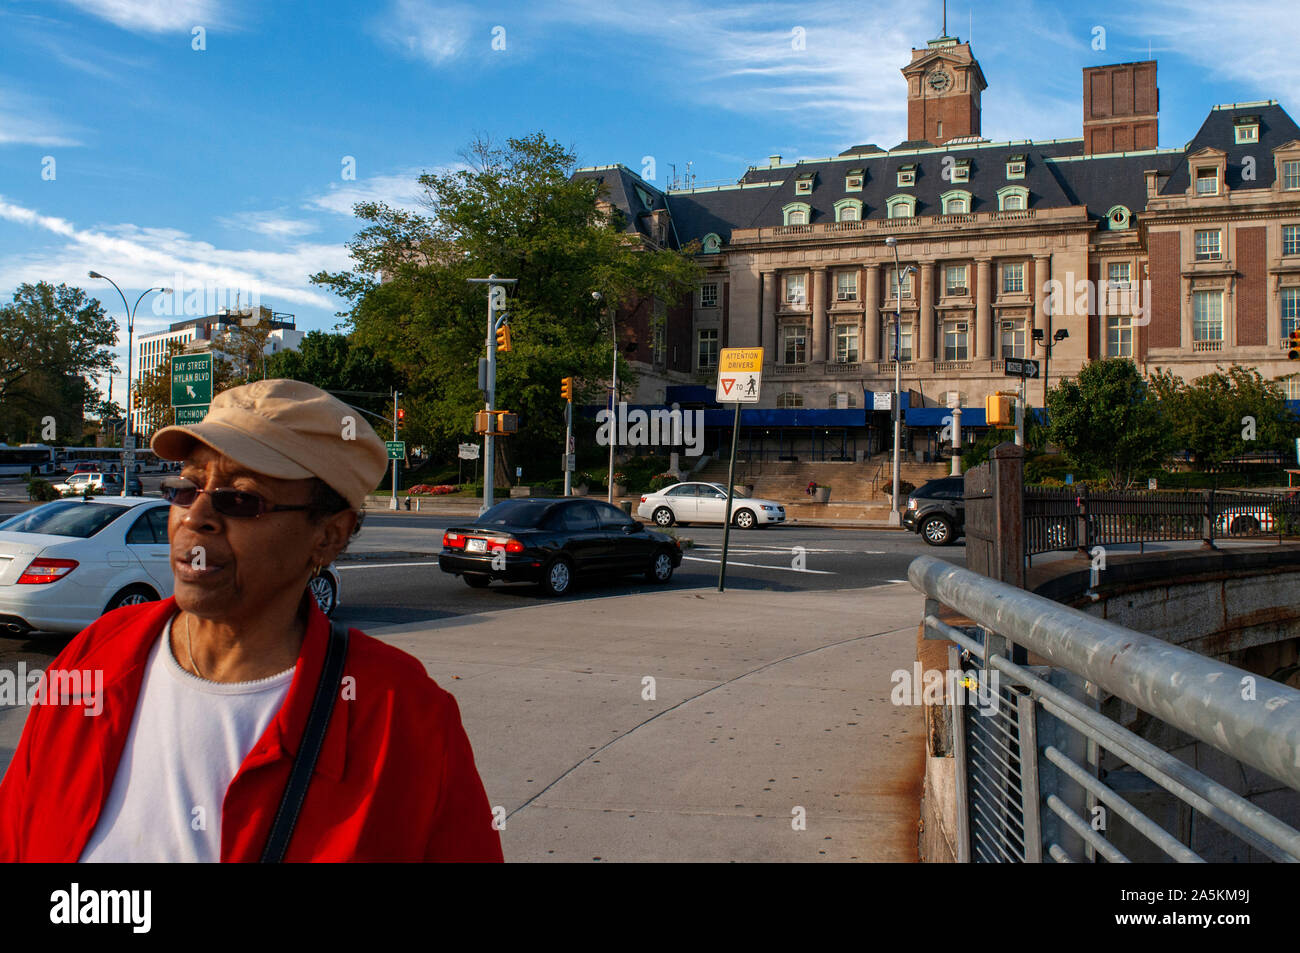 Local black people and low angle view of the landmarked Staten Island Borough Hall on Richmond Avenue Terrace, St. George, Staten Island, New York Cit Stock Photo